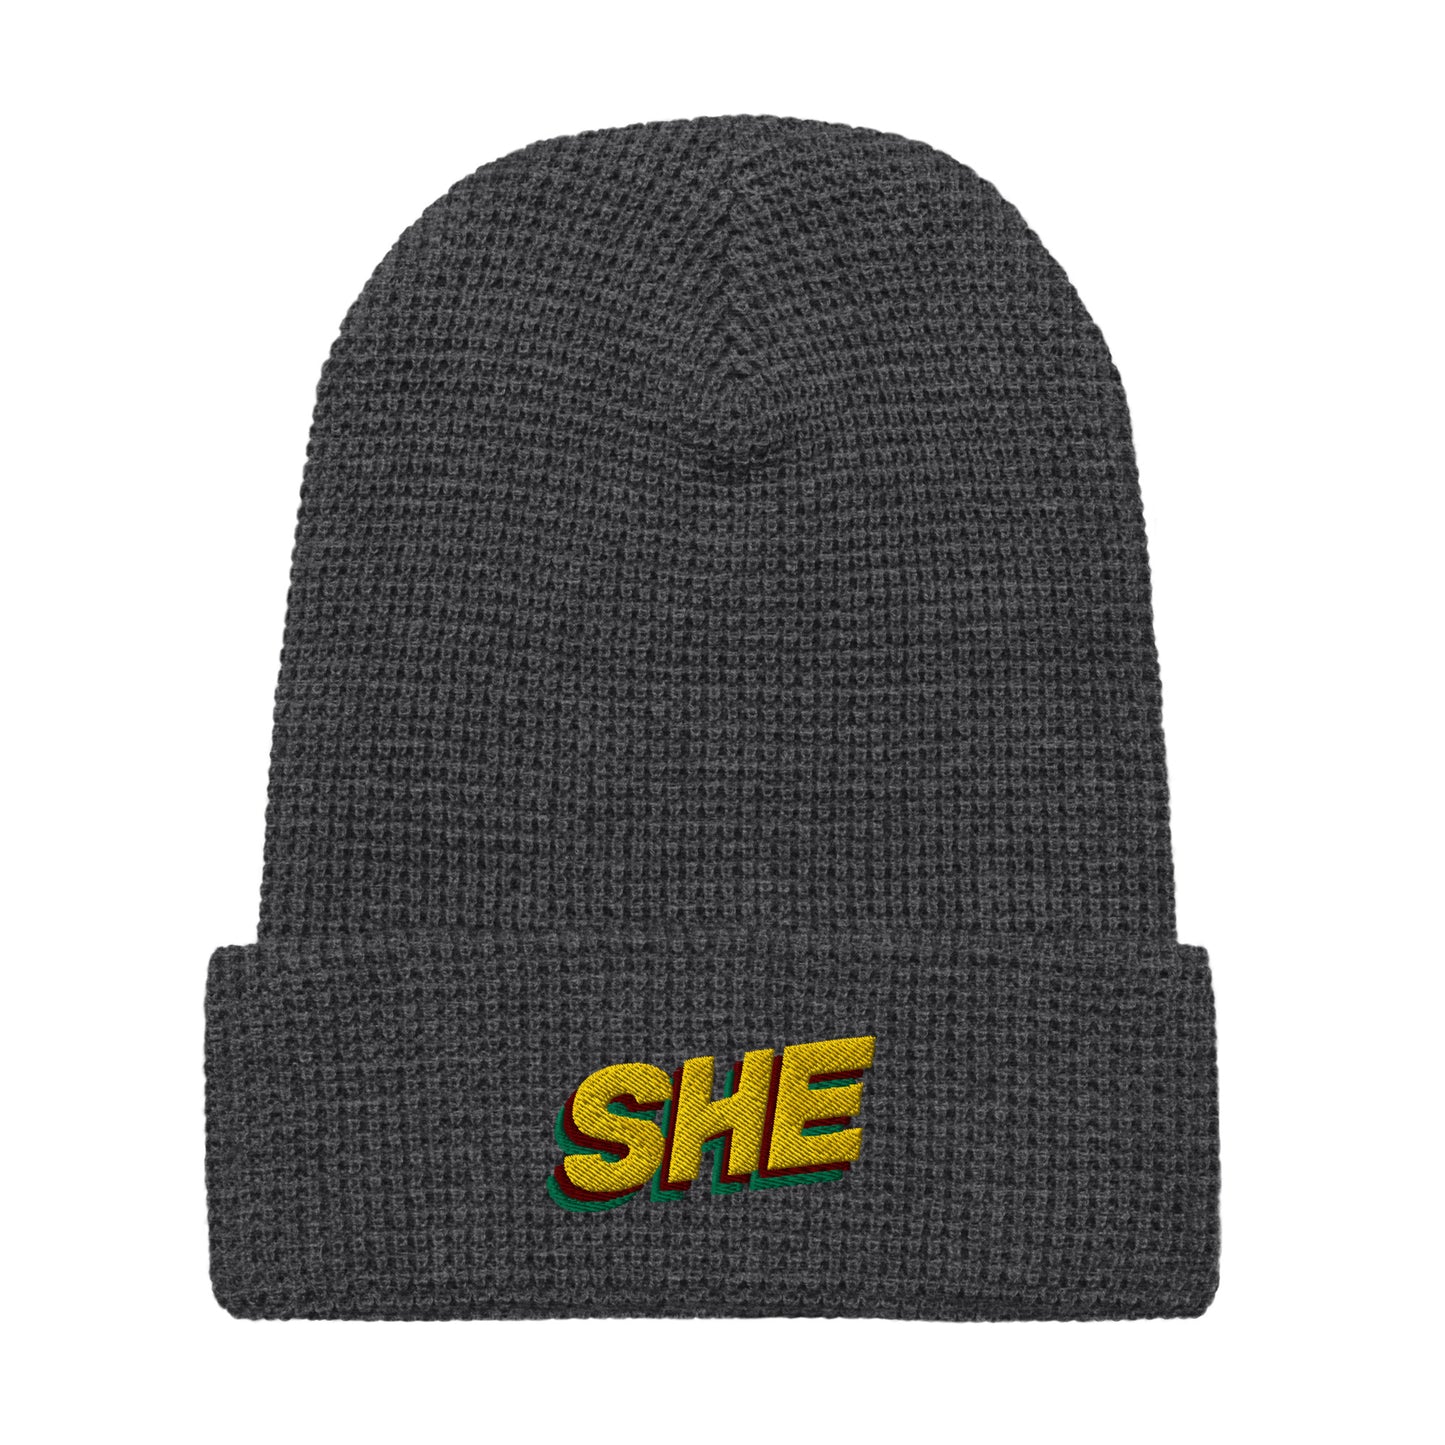 Darl grey waffle knit beanie hat with the word SHE embroidered on the front fold in the color gold, with a green and ruby shadow below it.